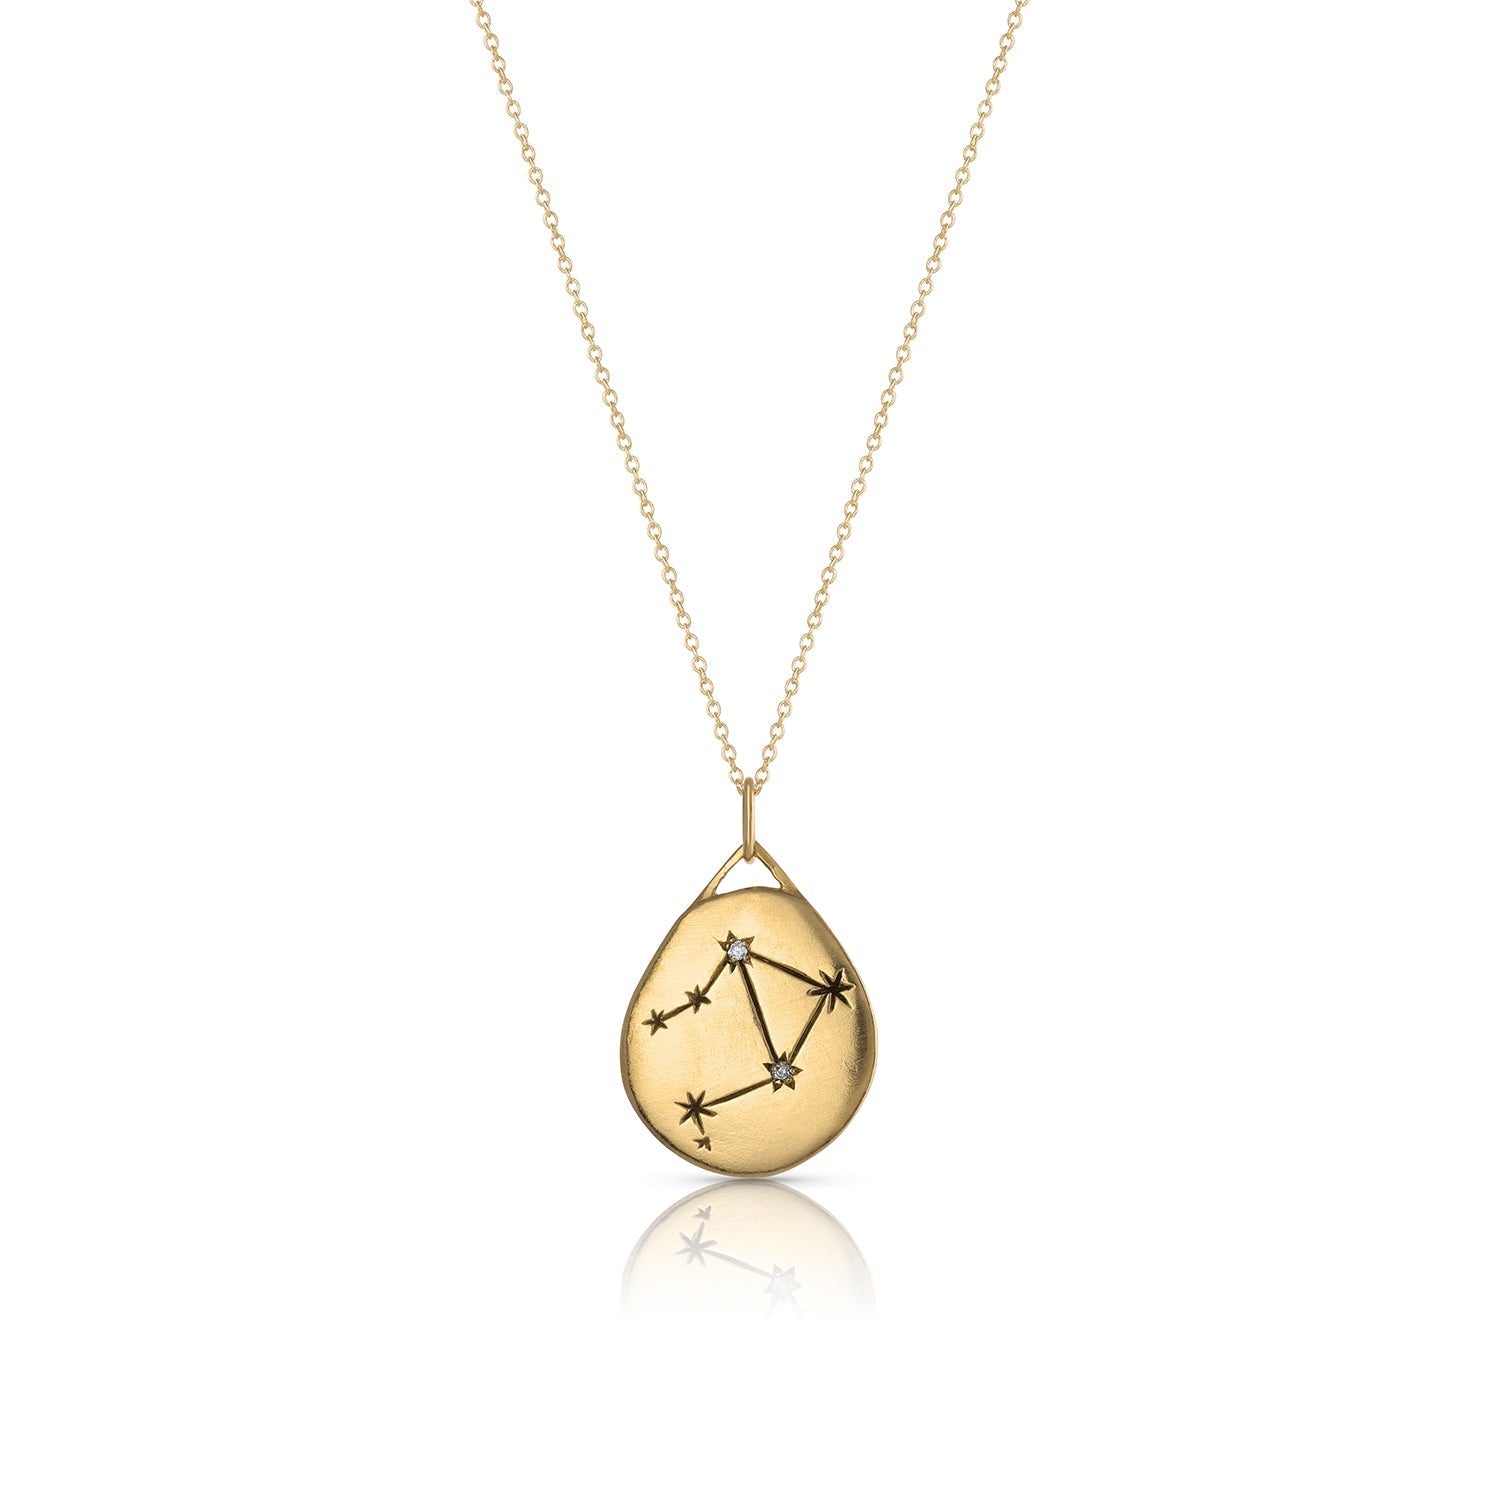 Libra Celestial Zodiac Necklace | 12th HOUSE | Mystical Fine Jewelry | Gold constellation necklace | Fine zodiac necklace 14k gold constellation necklace Constellation necklace Libra constellation necklace Gold Libra constellation necklace |